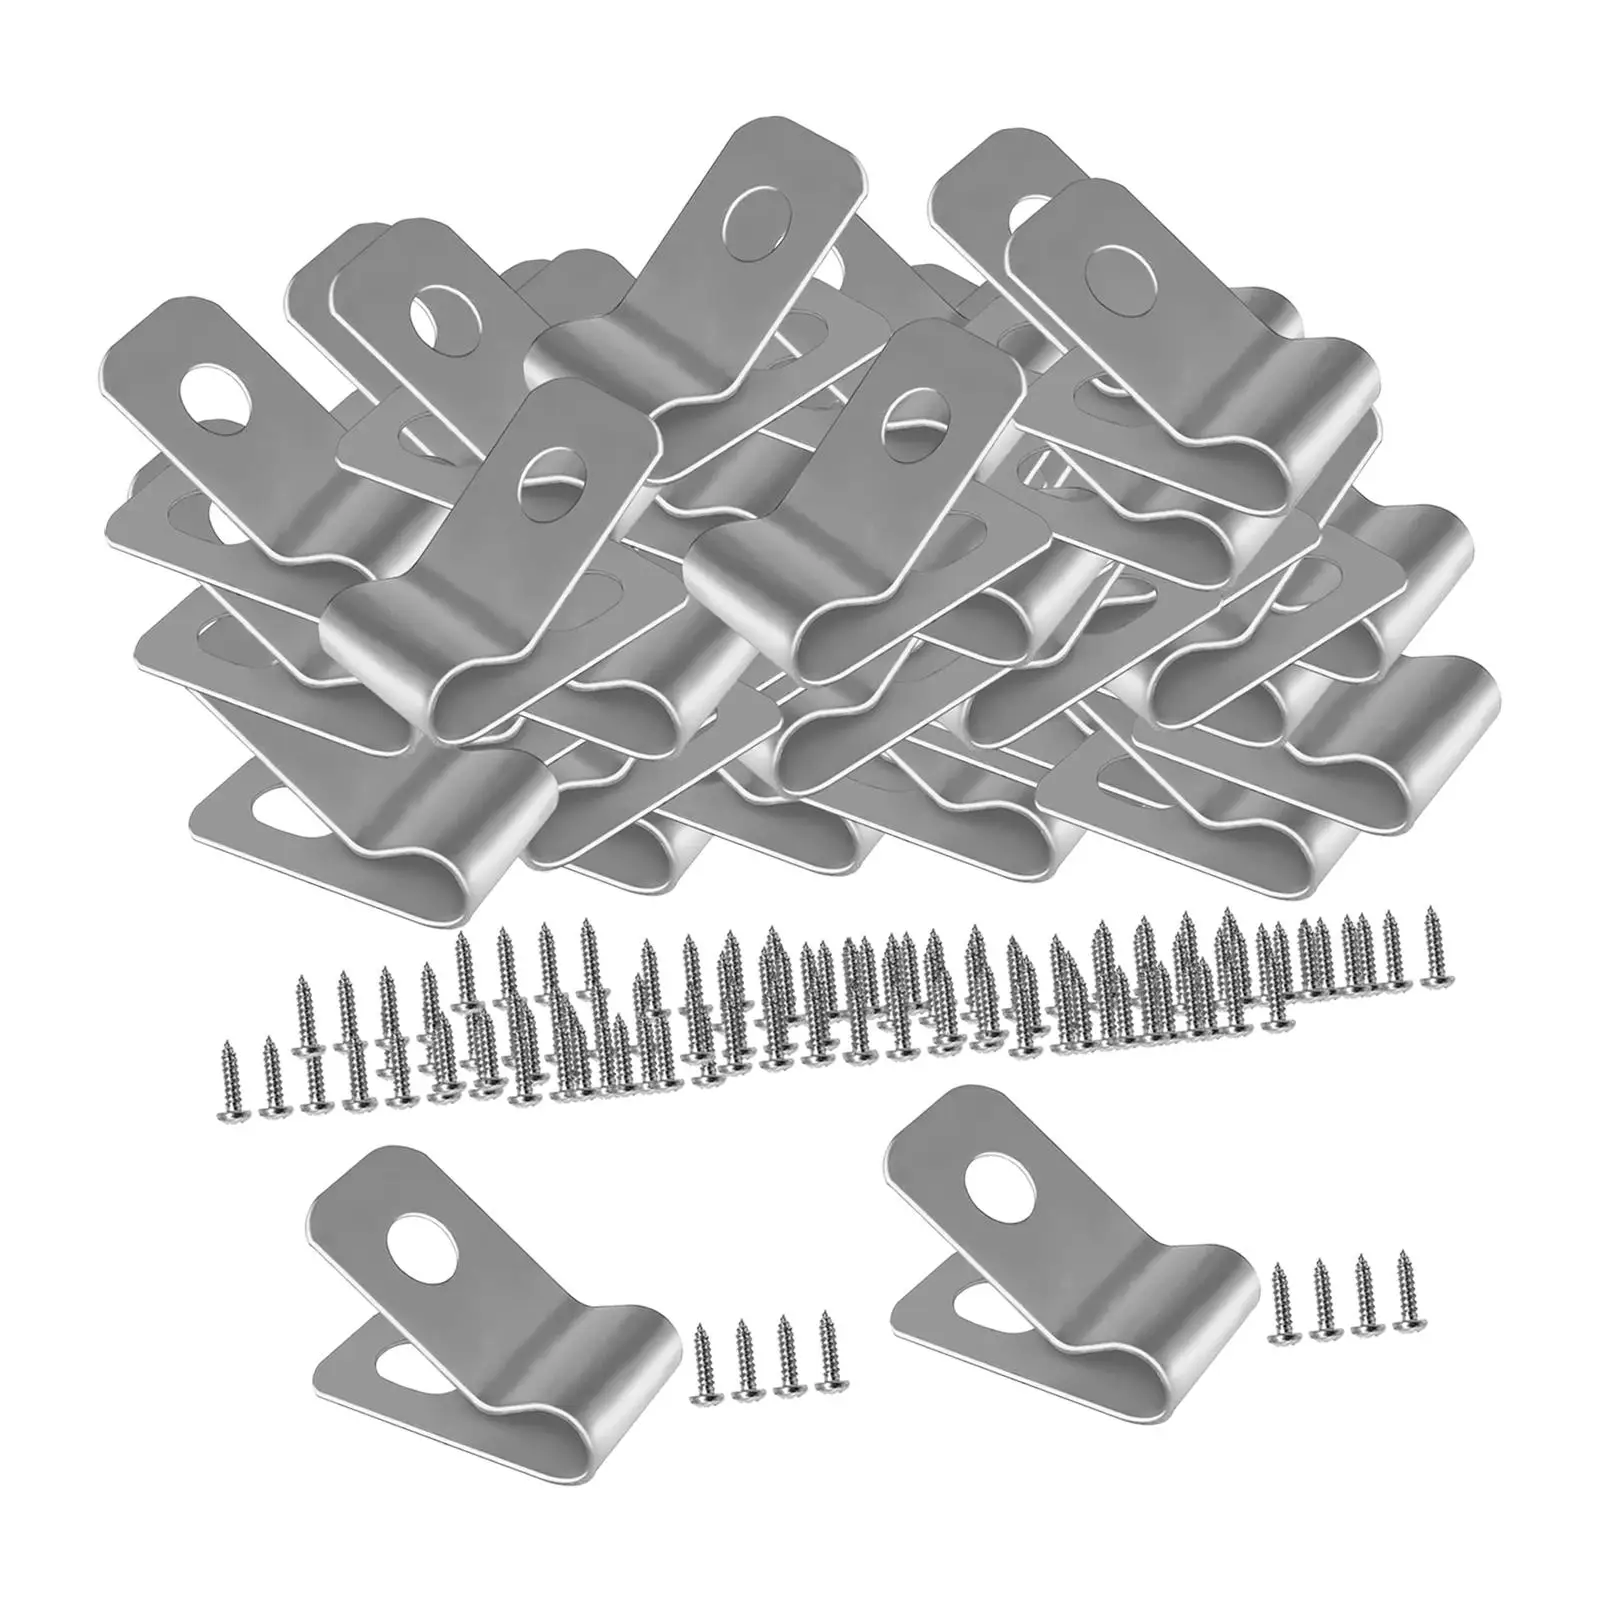 100Pcs Wire Fence Clips with Tightening Screws Fencing Mounting Clips for Vinyl, Metal, Wood Fence Lightweight Multifunctional